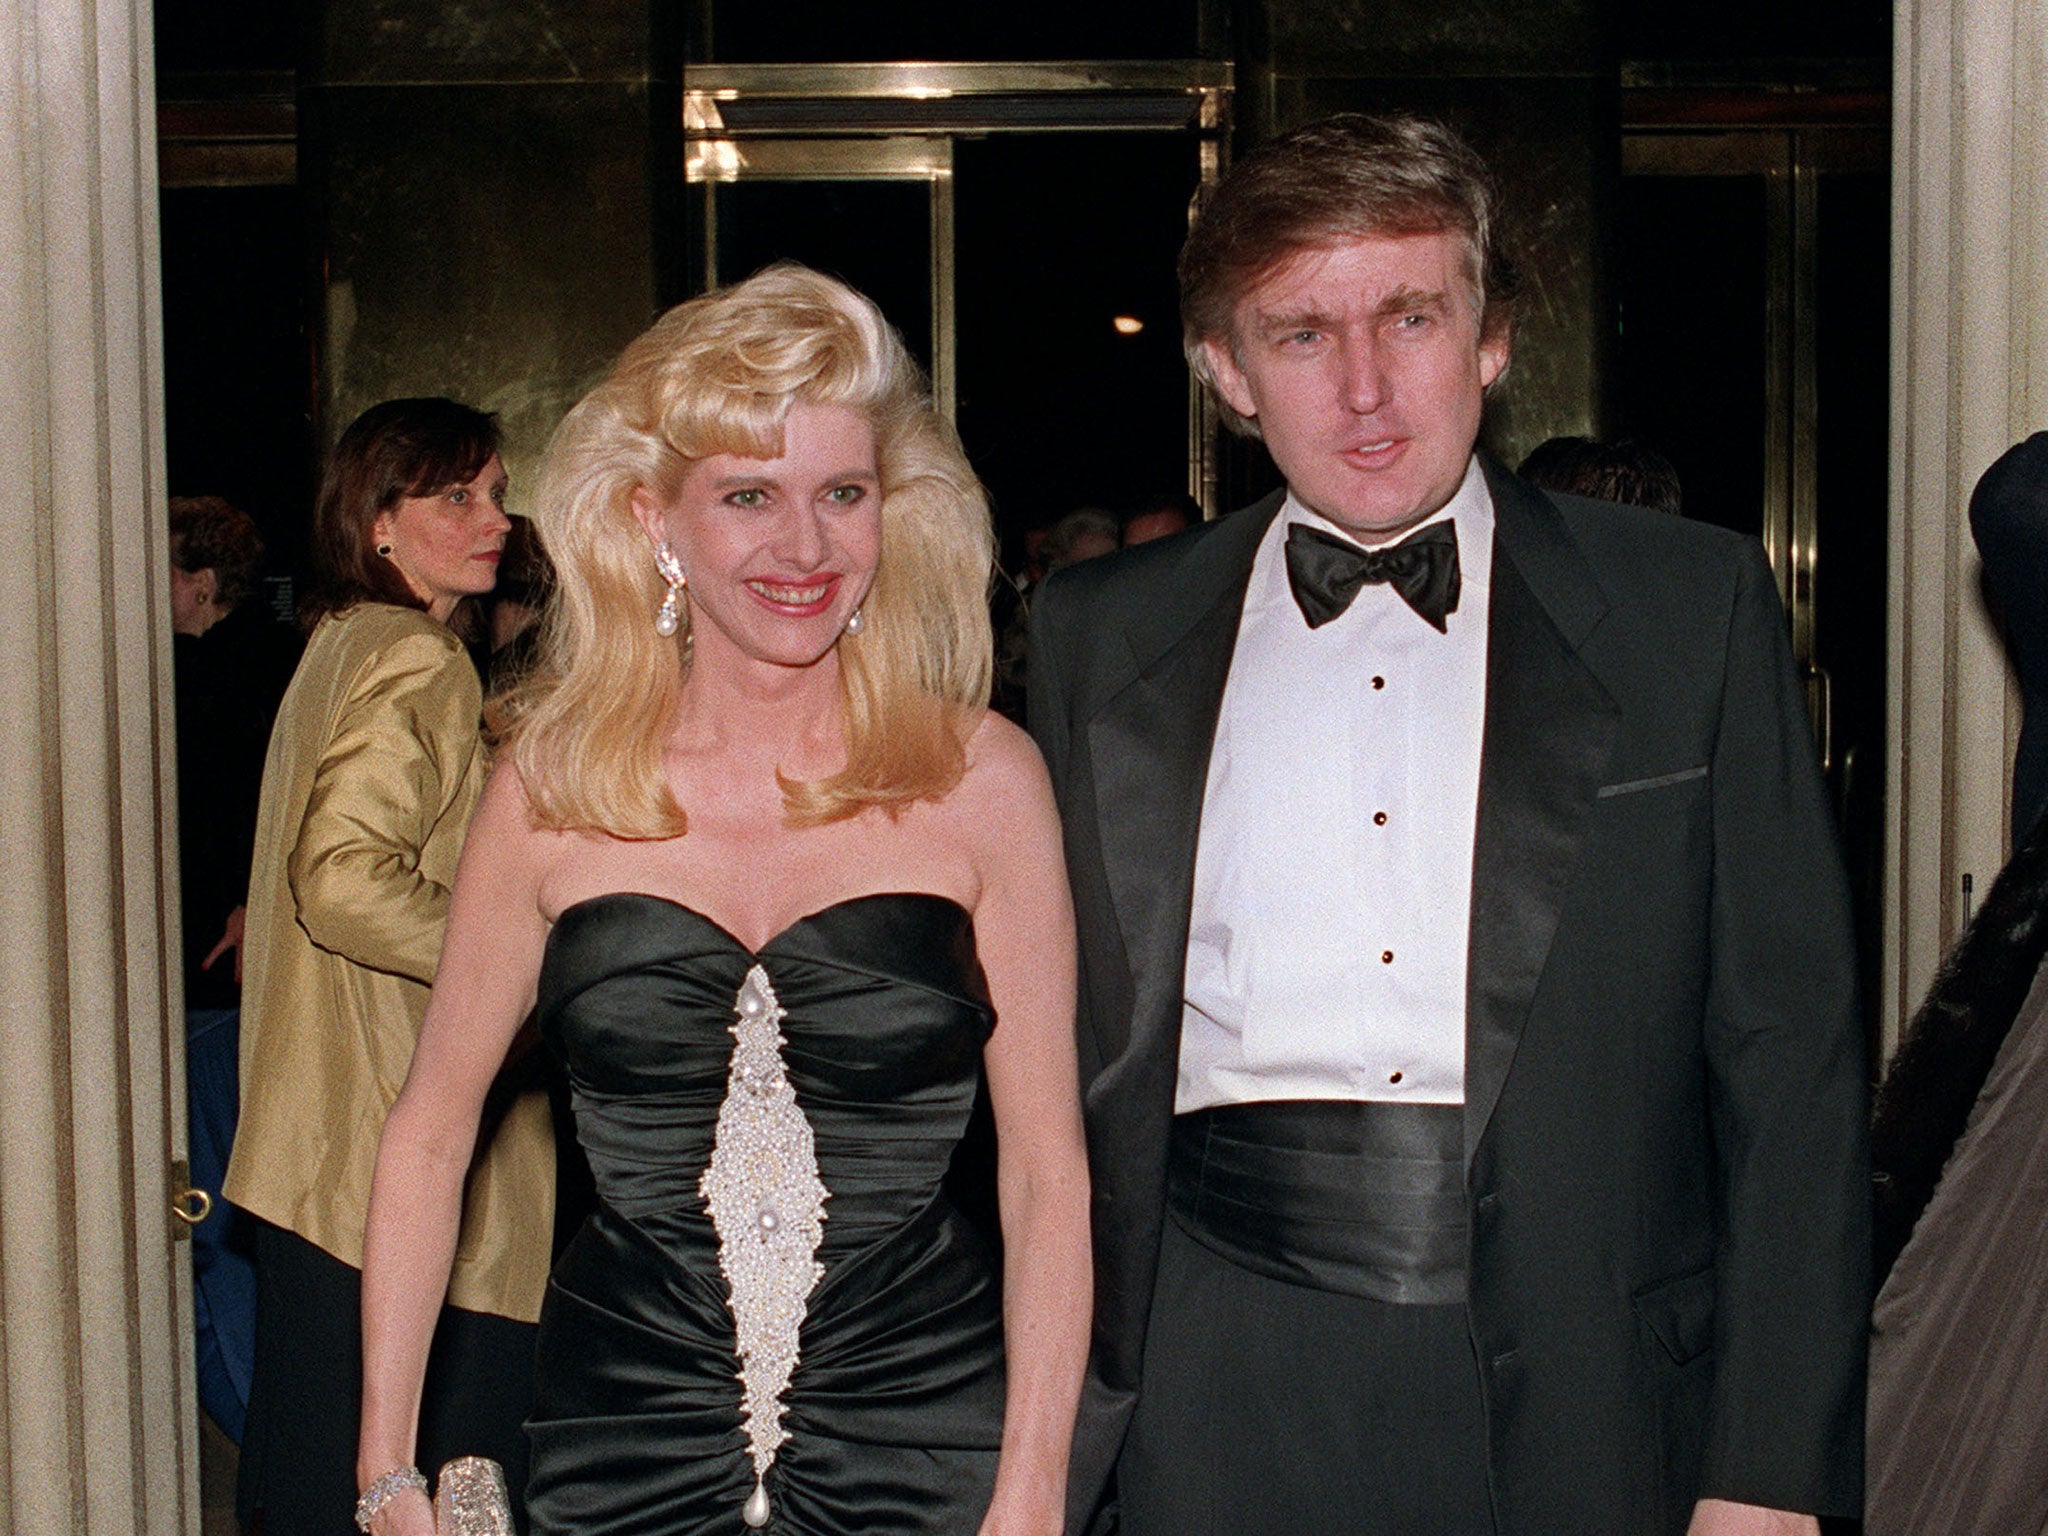 Donald Trump and his wife Ivana arrive at a social engagement in New York, 4 December, 1989